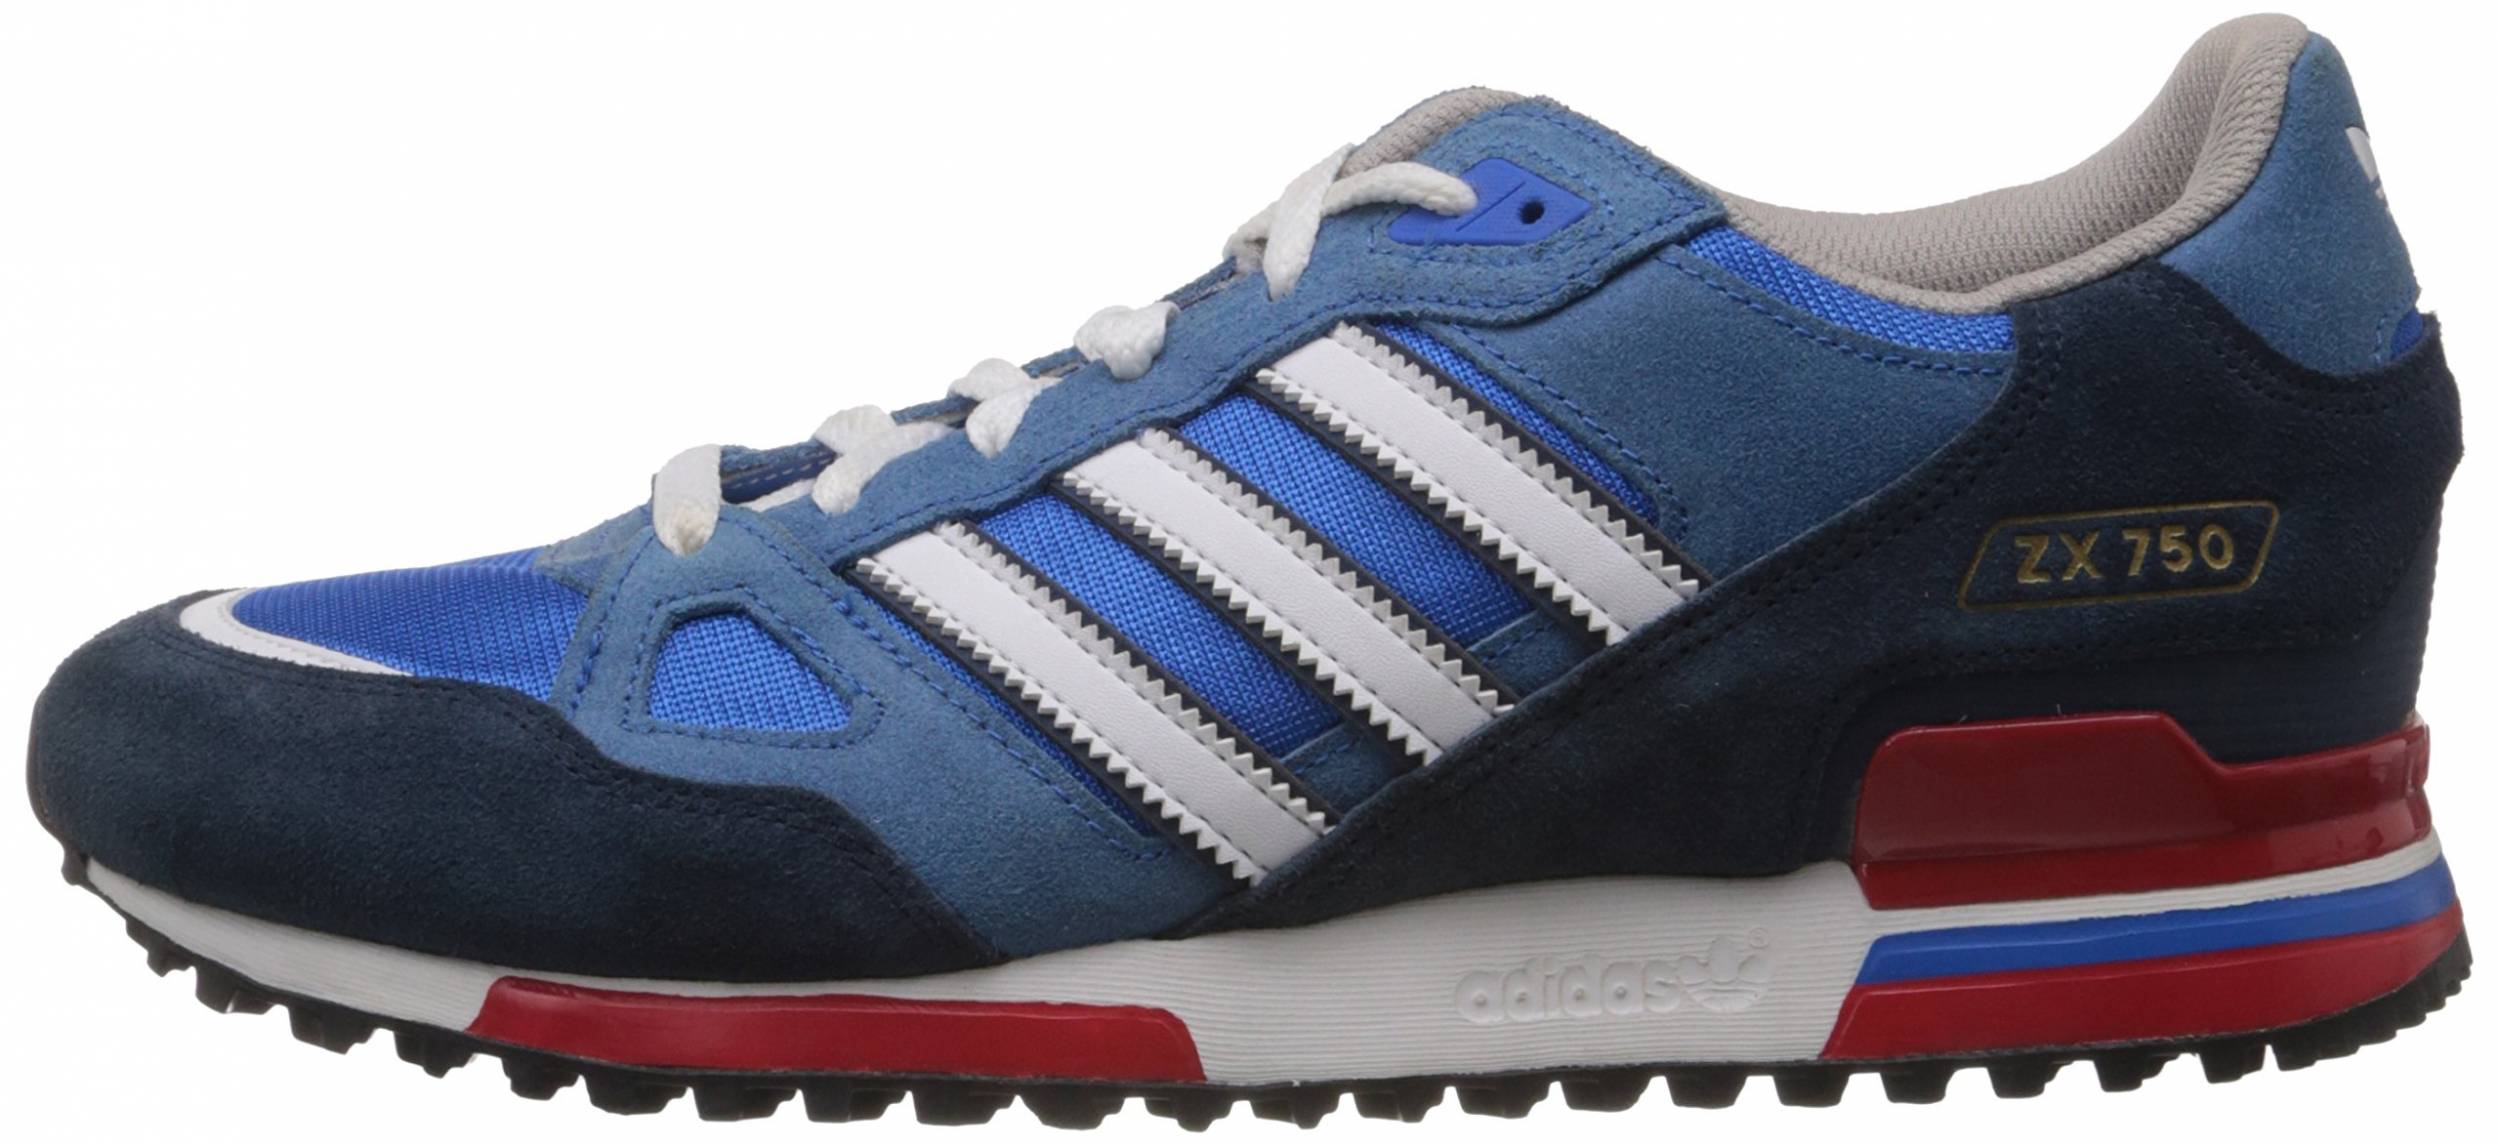 adidas zx 750 sneakers basses homme